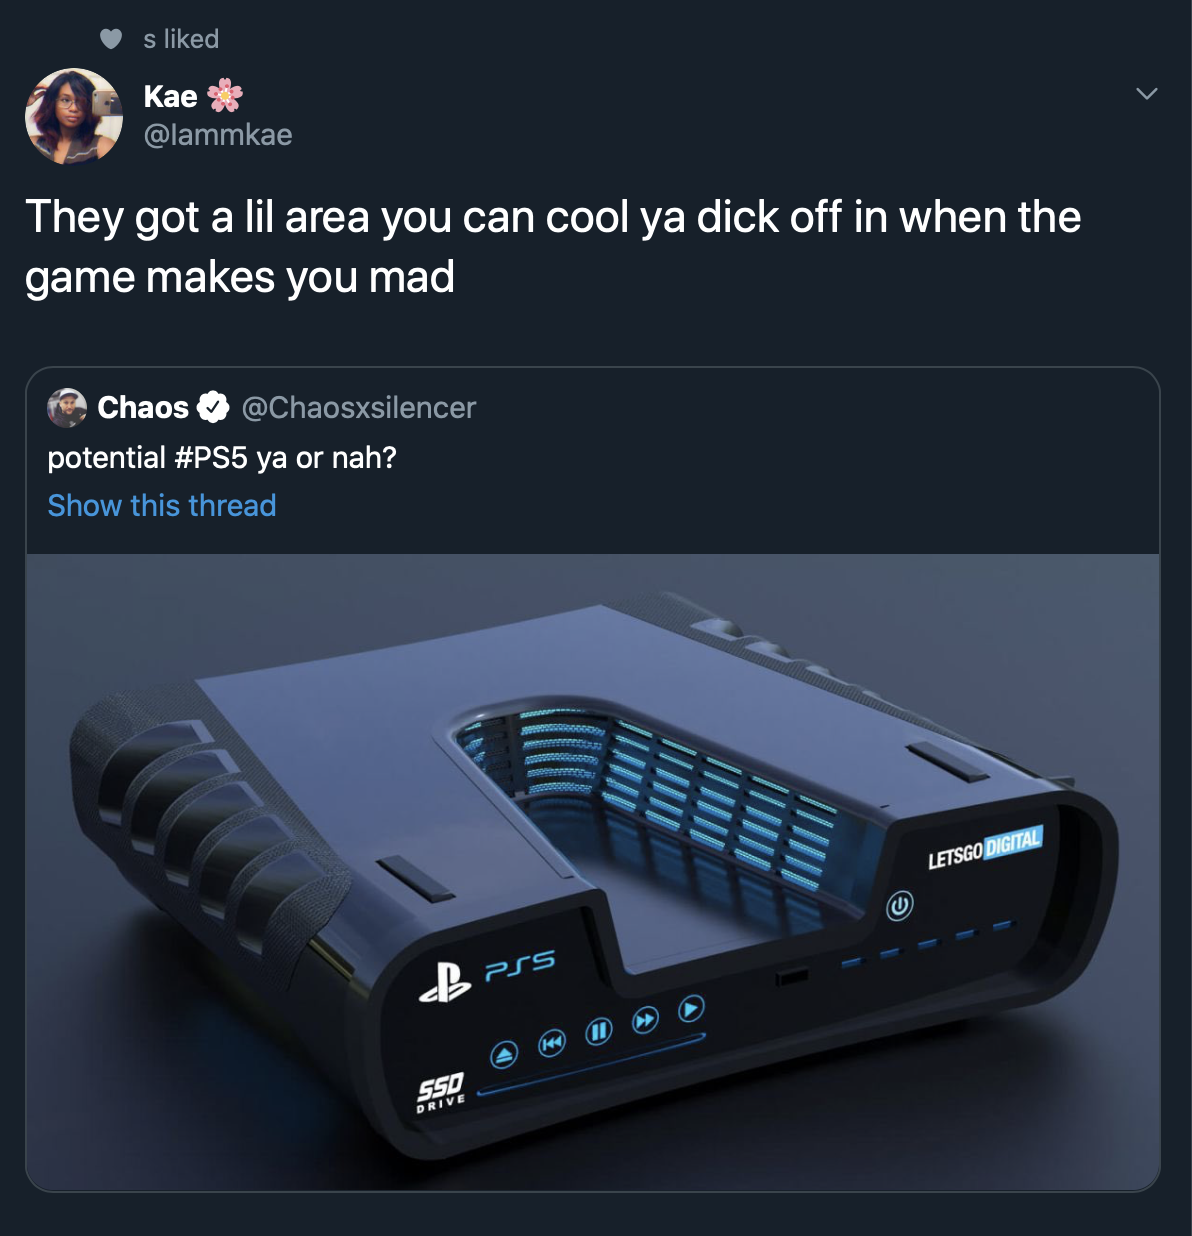 playstation 5 - s d Kae They got a lil area you can cool ya dick off in when the game makes you mad Chaosxsilencer potential ya or nah? Show this thread Ilm Mi Letro B 255 S150